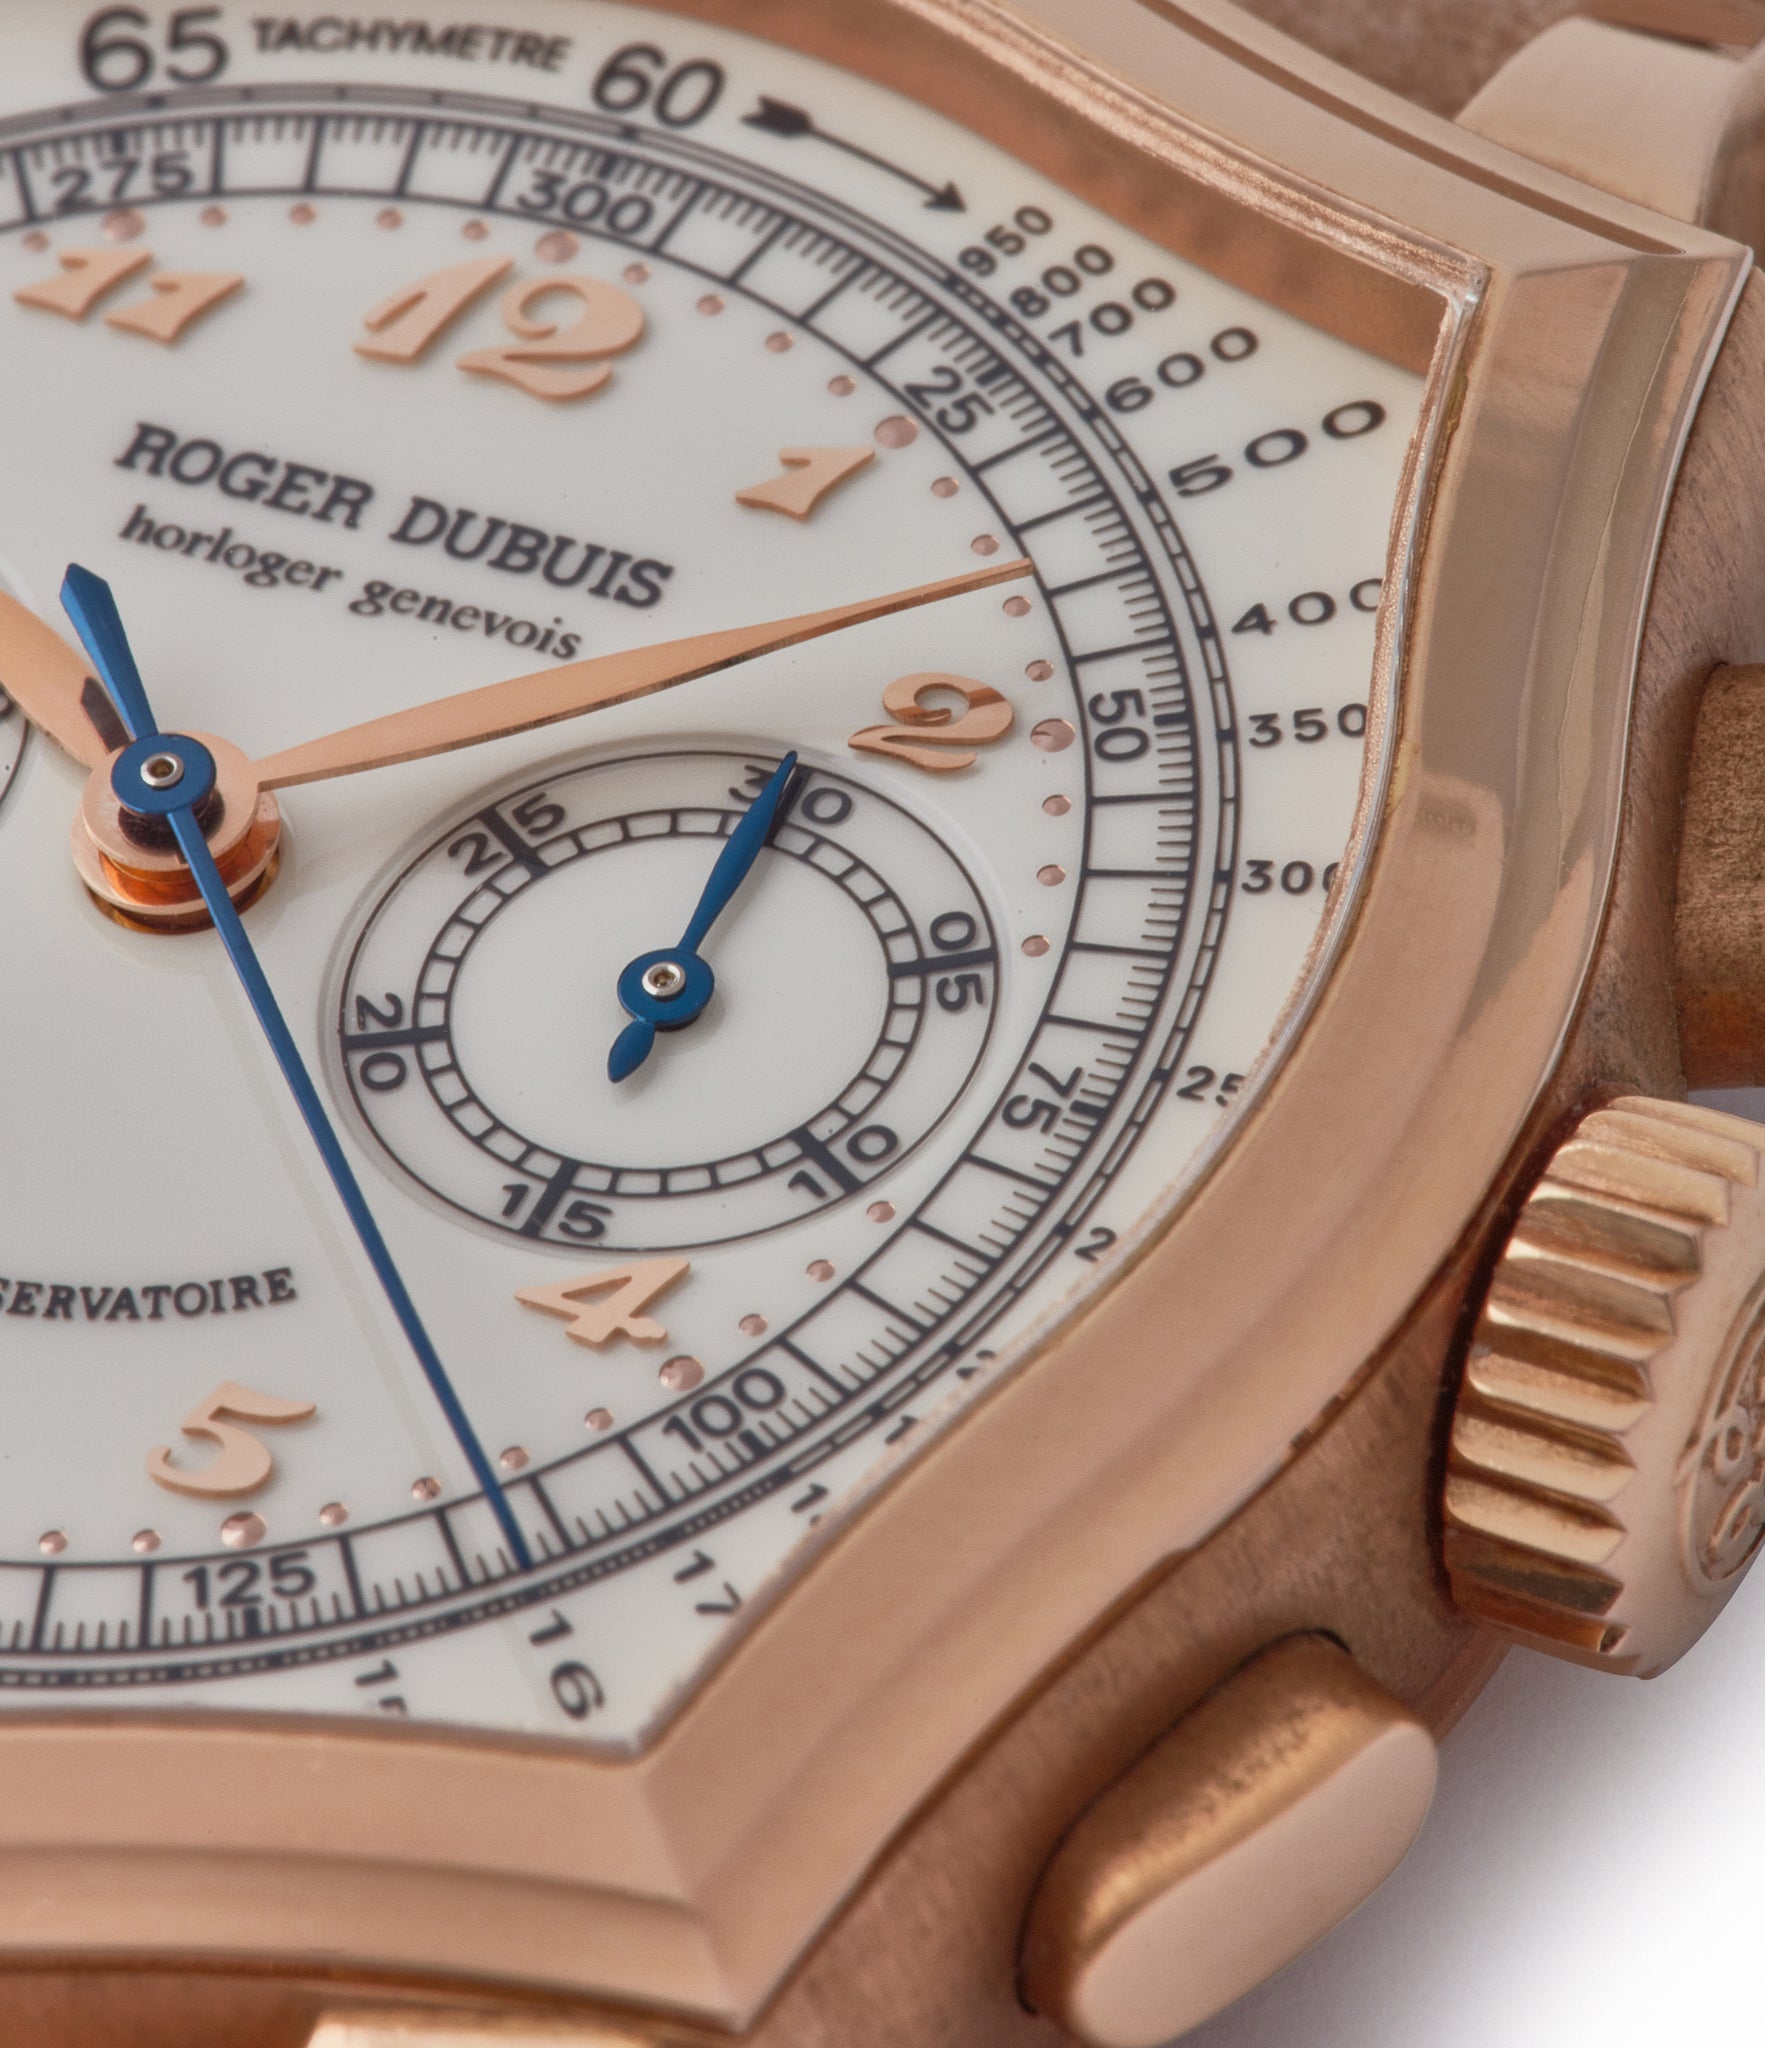 Breguet dial Roger Dubuis Sympathie Chronograph S37 56 0 rose gold dress watch for sale online at A Collected Man London UK specialist of independent watchmakers